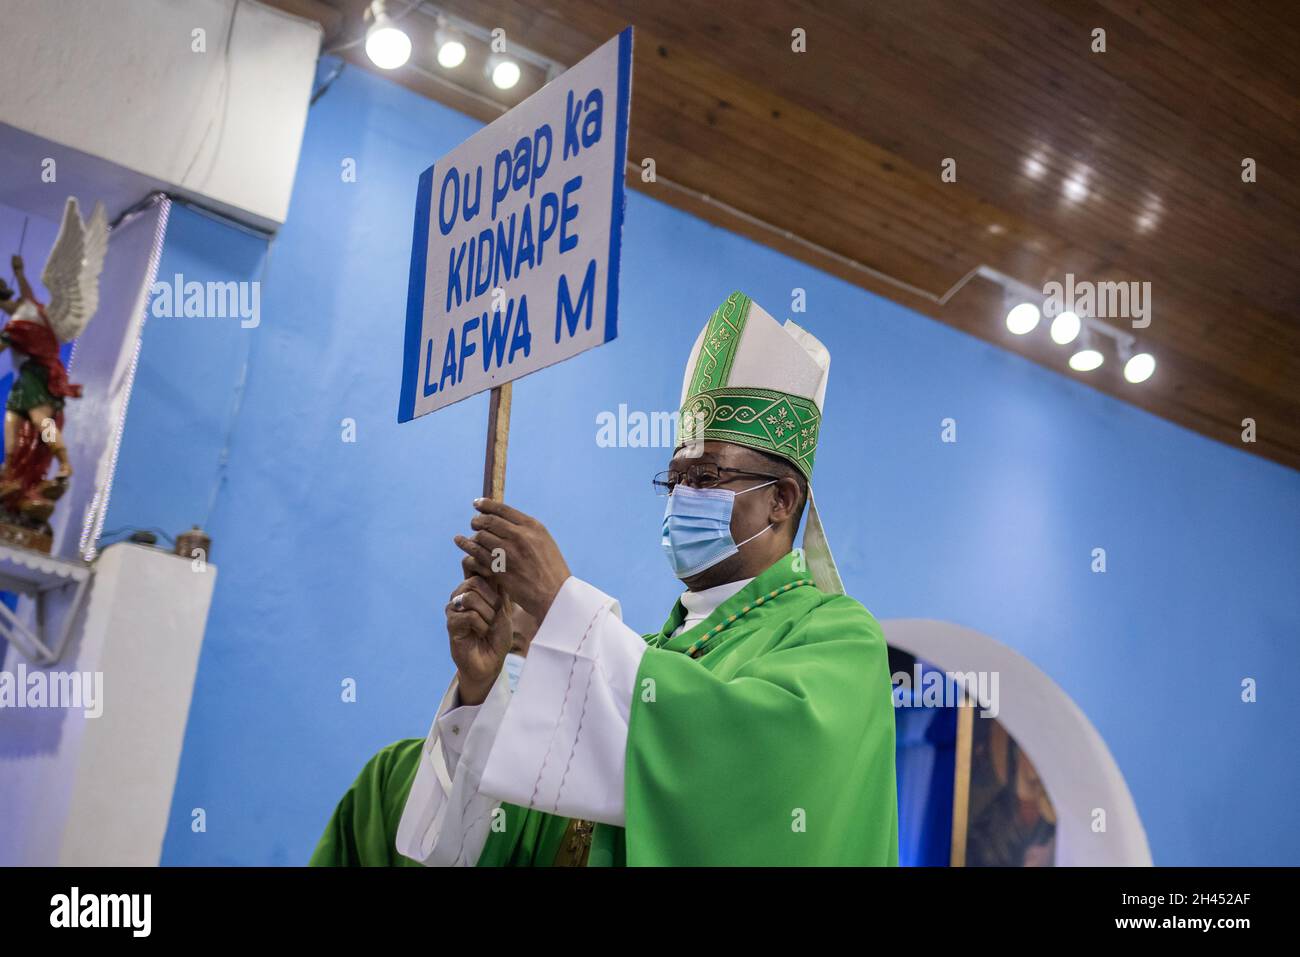 Max Leroy Mesidor, the Metropolitan Archbishop of Port-au-Prince, holds a placard that reads 'You cannot kidnap my faith', which he received as an offering from worshippers during Sunday Catholic Mass at the Chapelle de l'Immaculee Conception de l'HUEH in Port-au-Prince, Haiti October 31, 2021. REUTERS/Adrees Latif Stock Photo